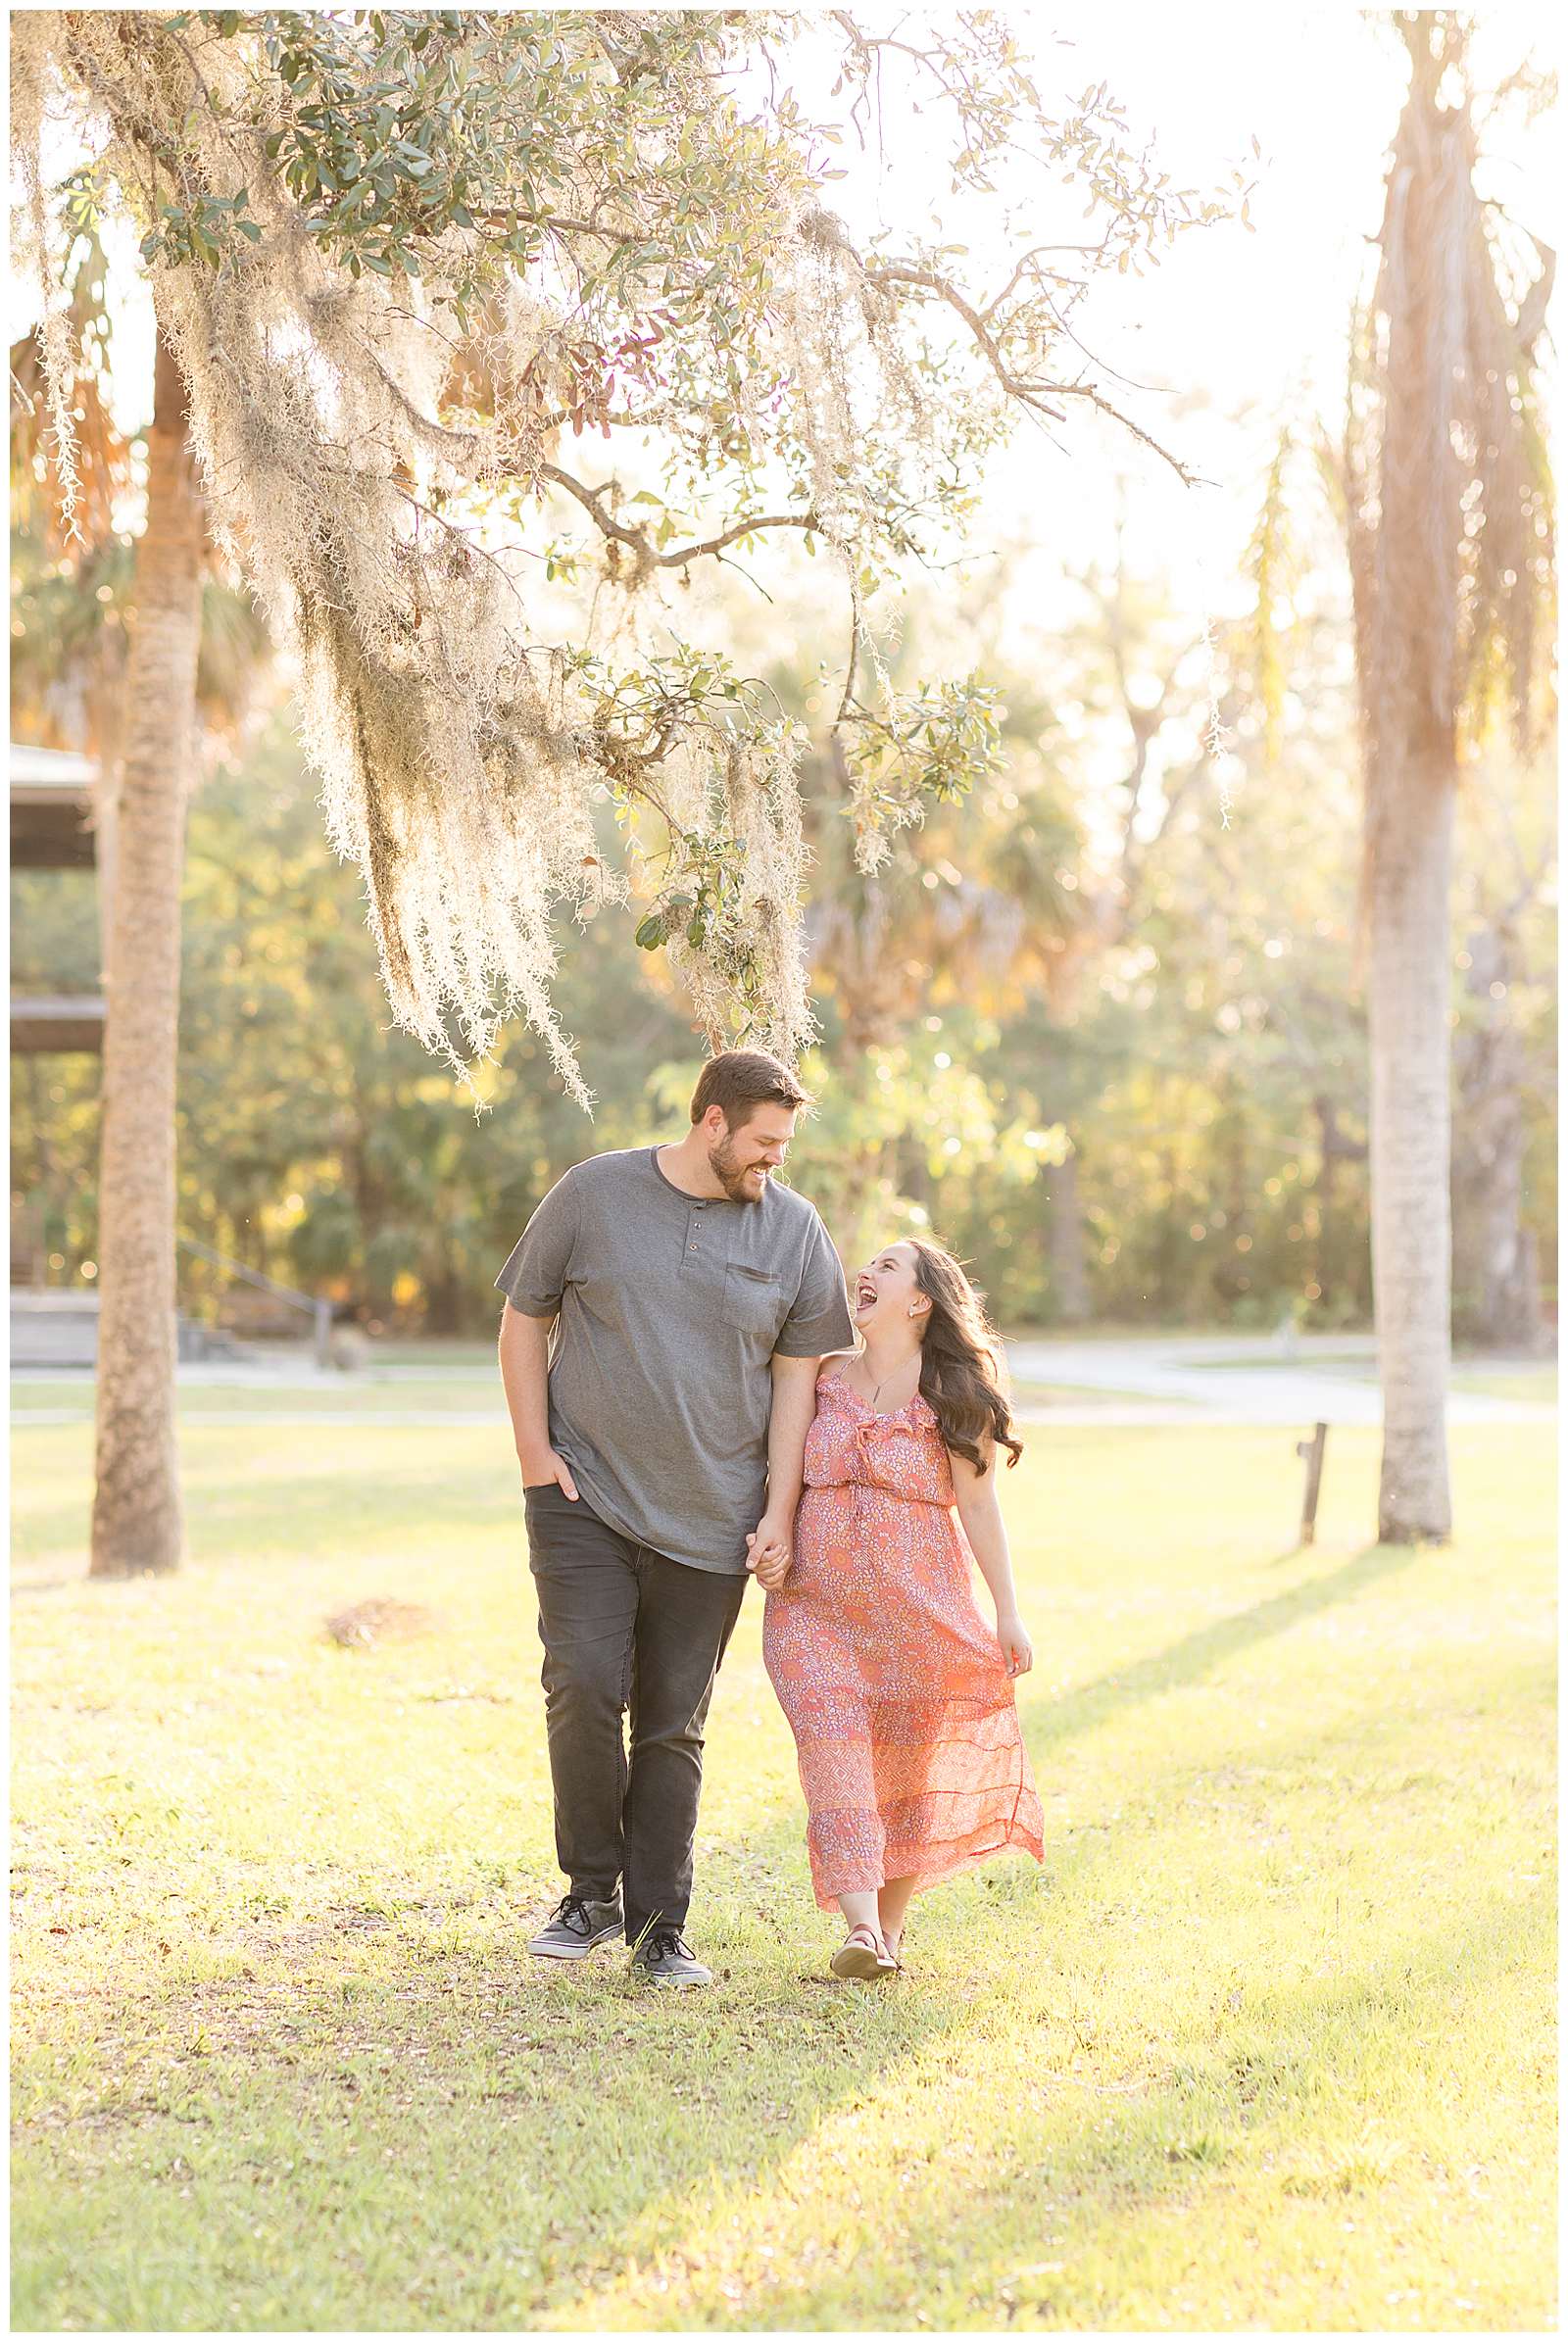 Rebecca Rice Photography capture a BIG height difference for her Behind the Lens membership community.  Couple holds hands and walks together through Florida grass and low hanging moss tress as they laugh together!
-rebeccaricephoto.com